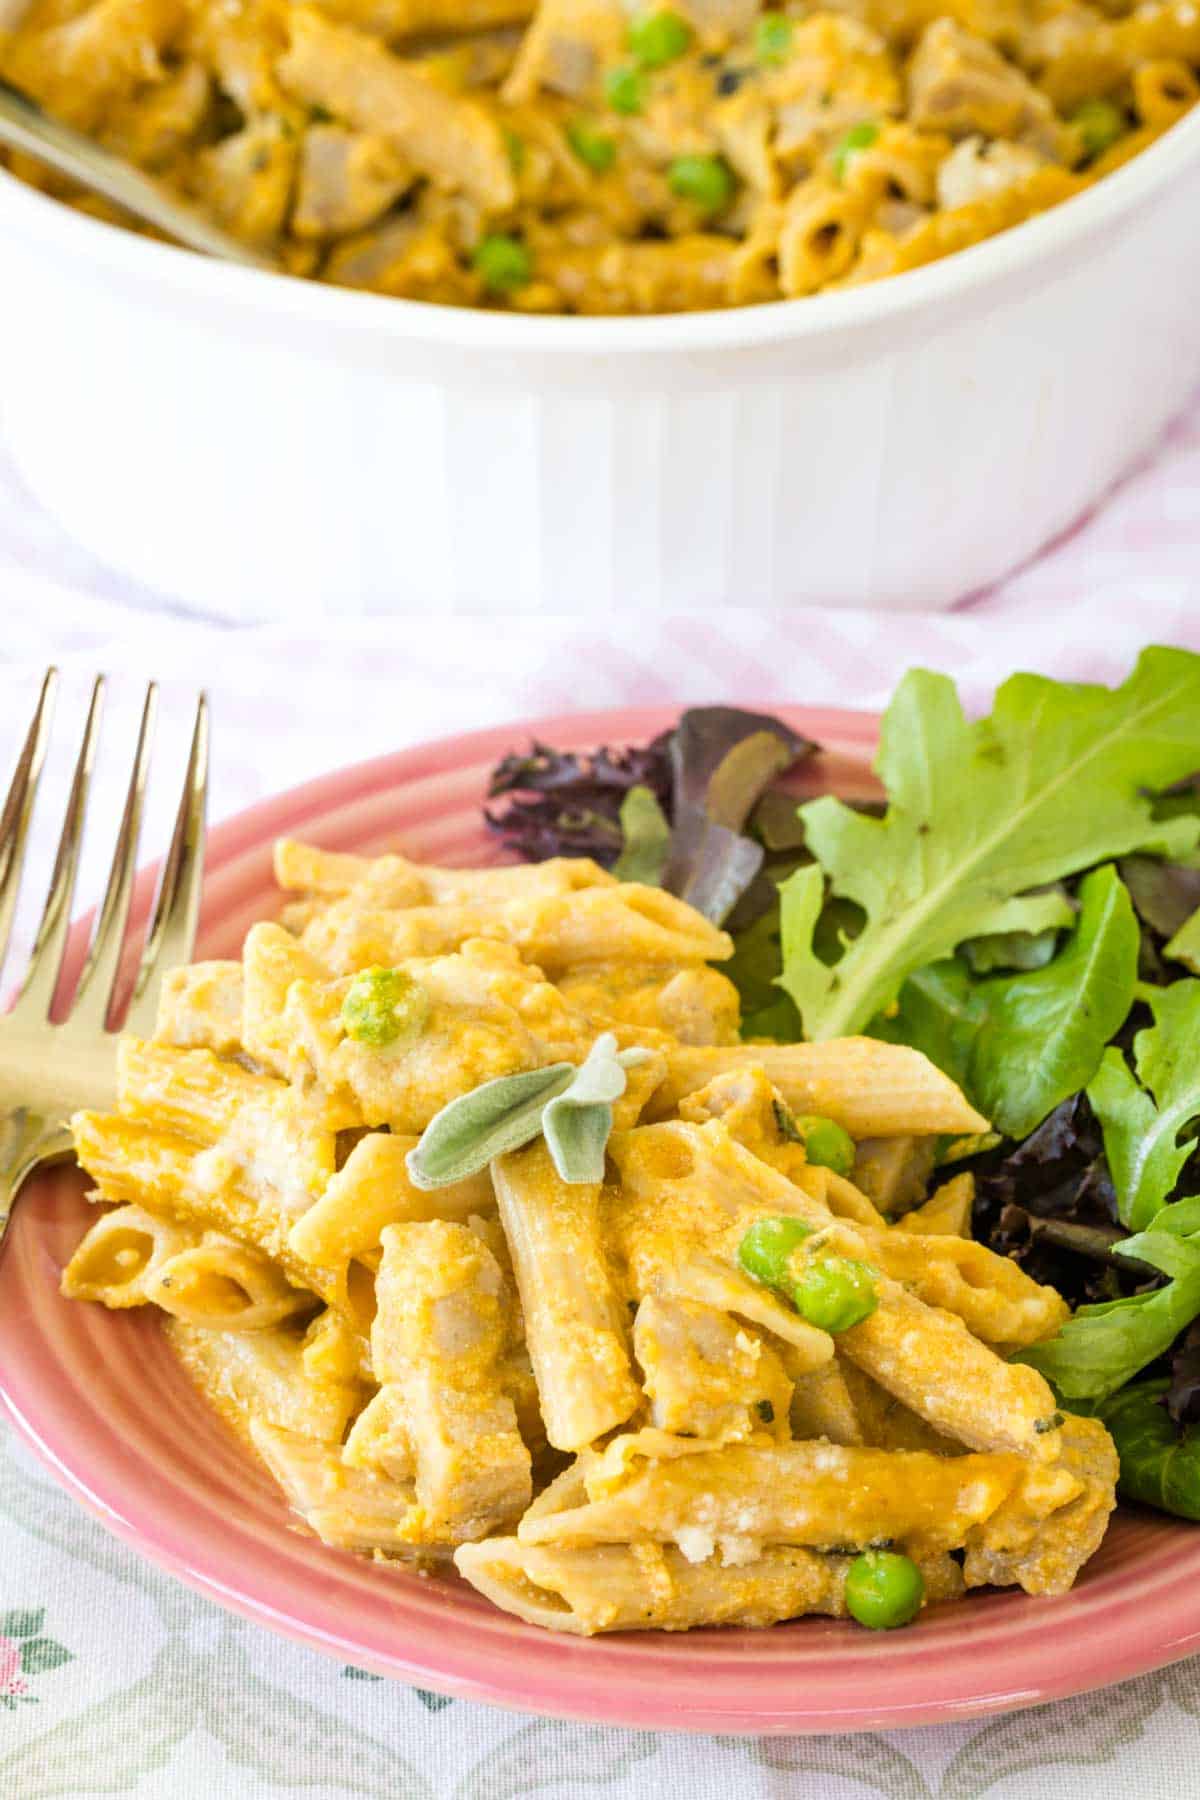 Pumpkin penne with cream sauce is served with a side of green salad, next to a fork.